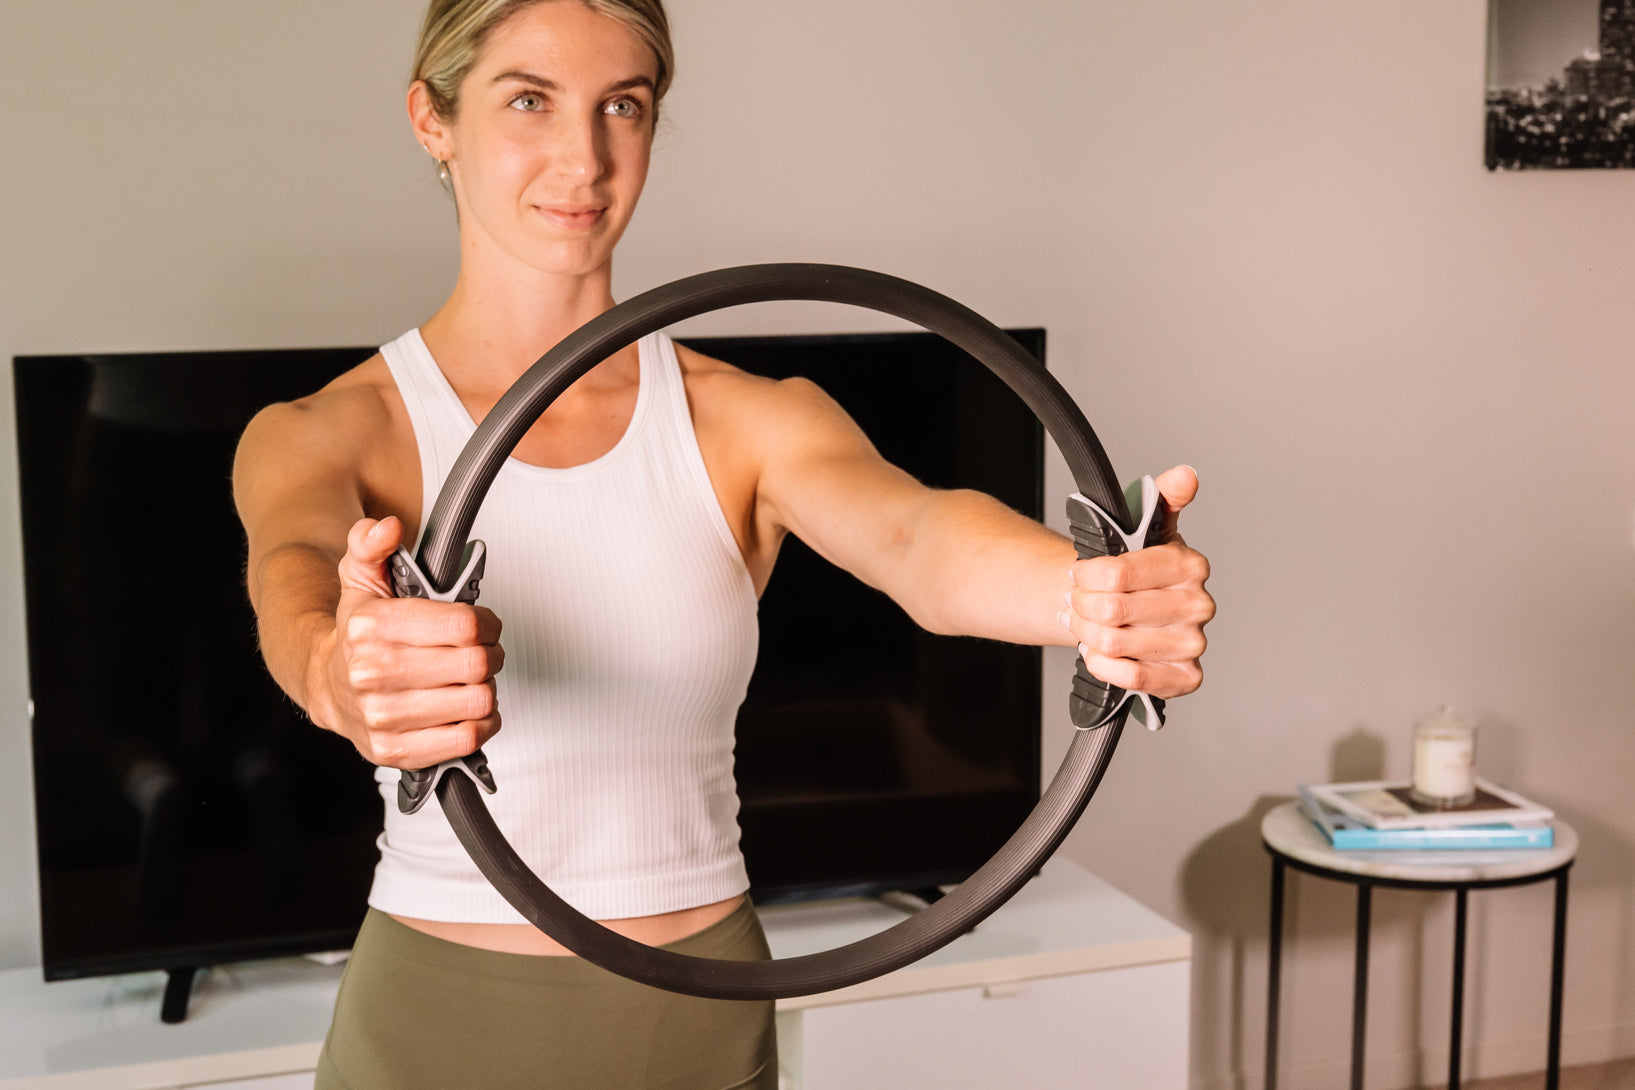 4 Magic Circle Pilates Exercises for a Tight Core & Toned Arms